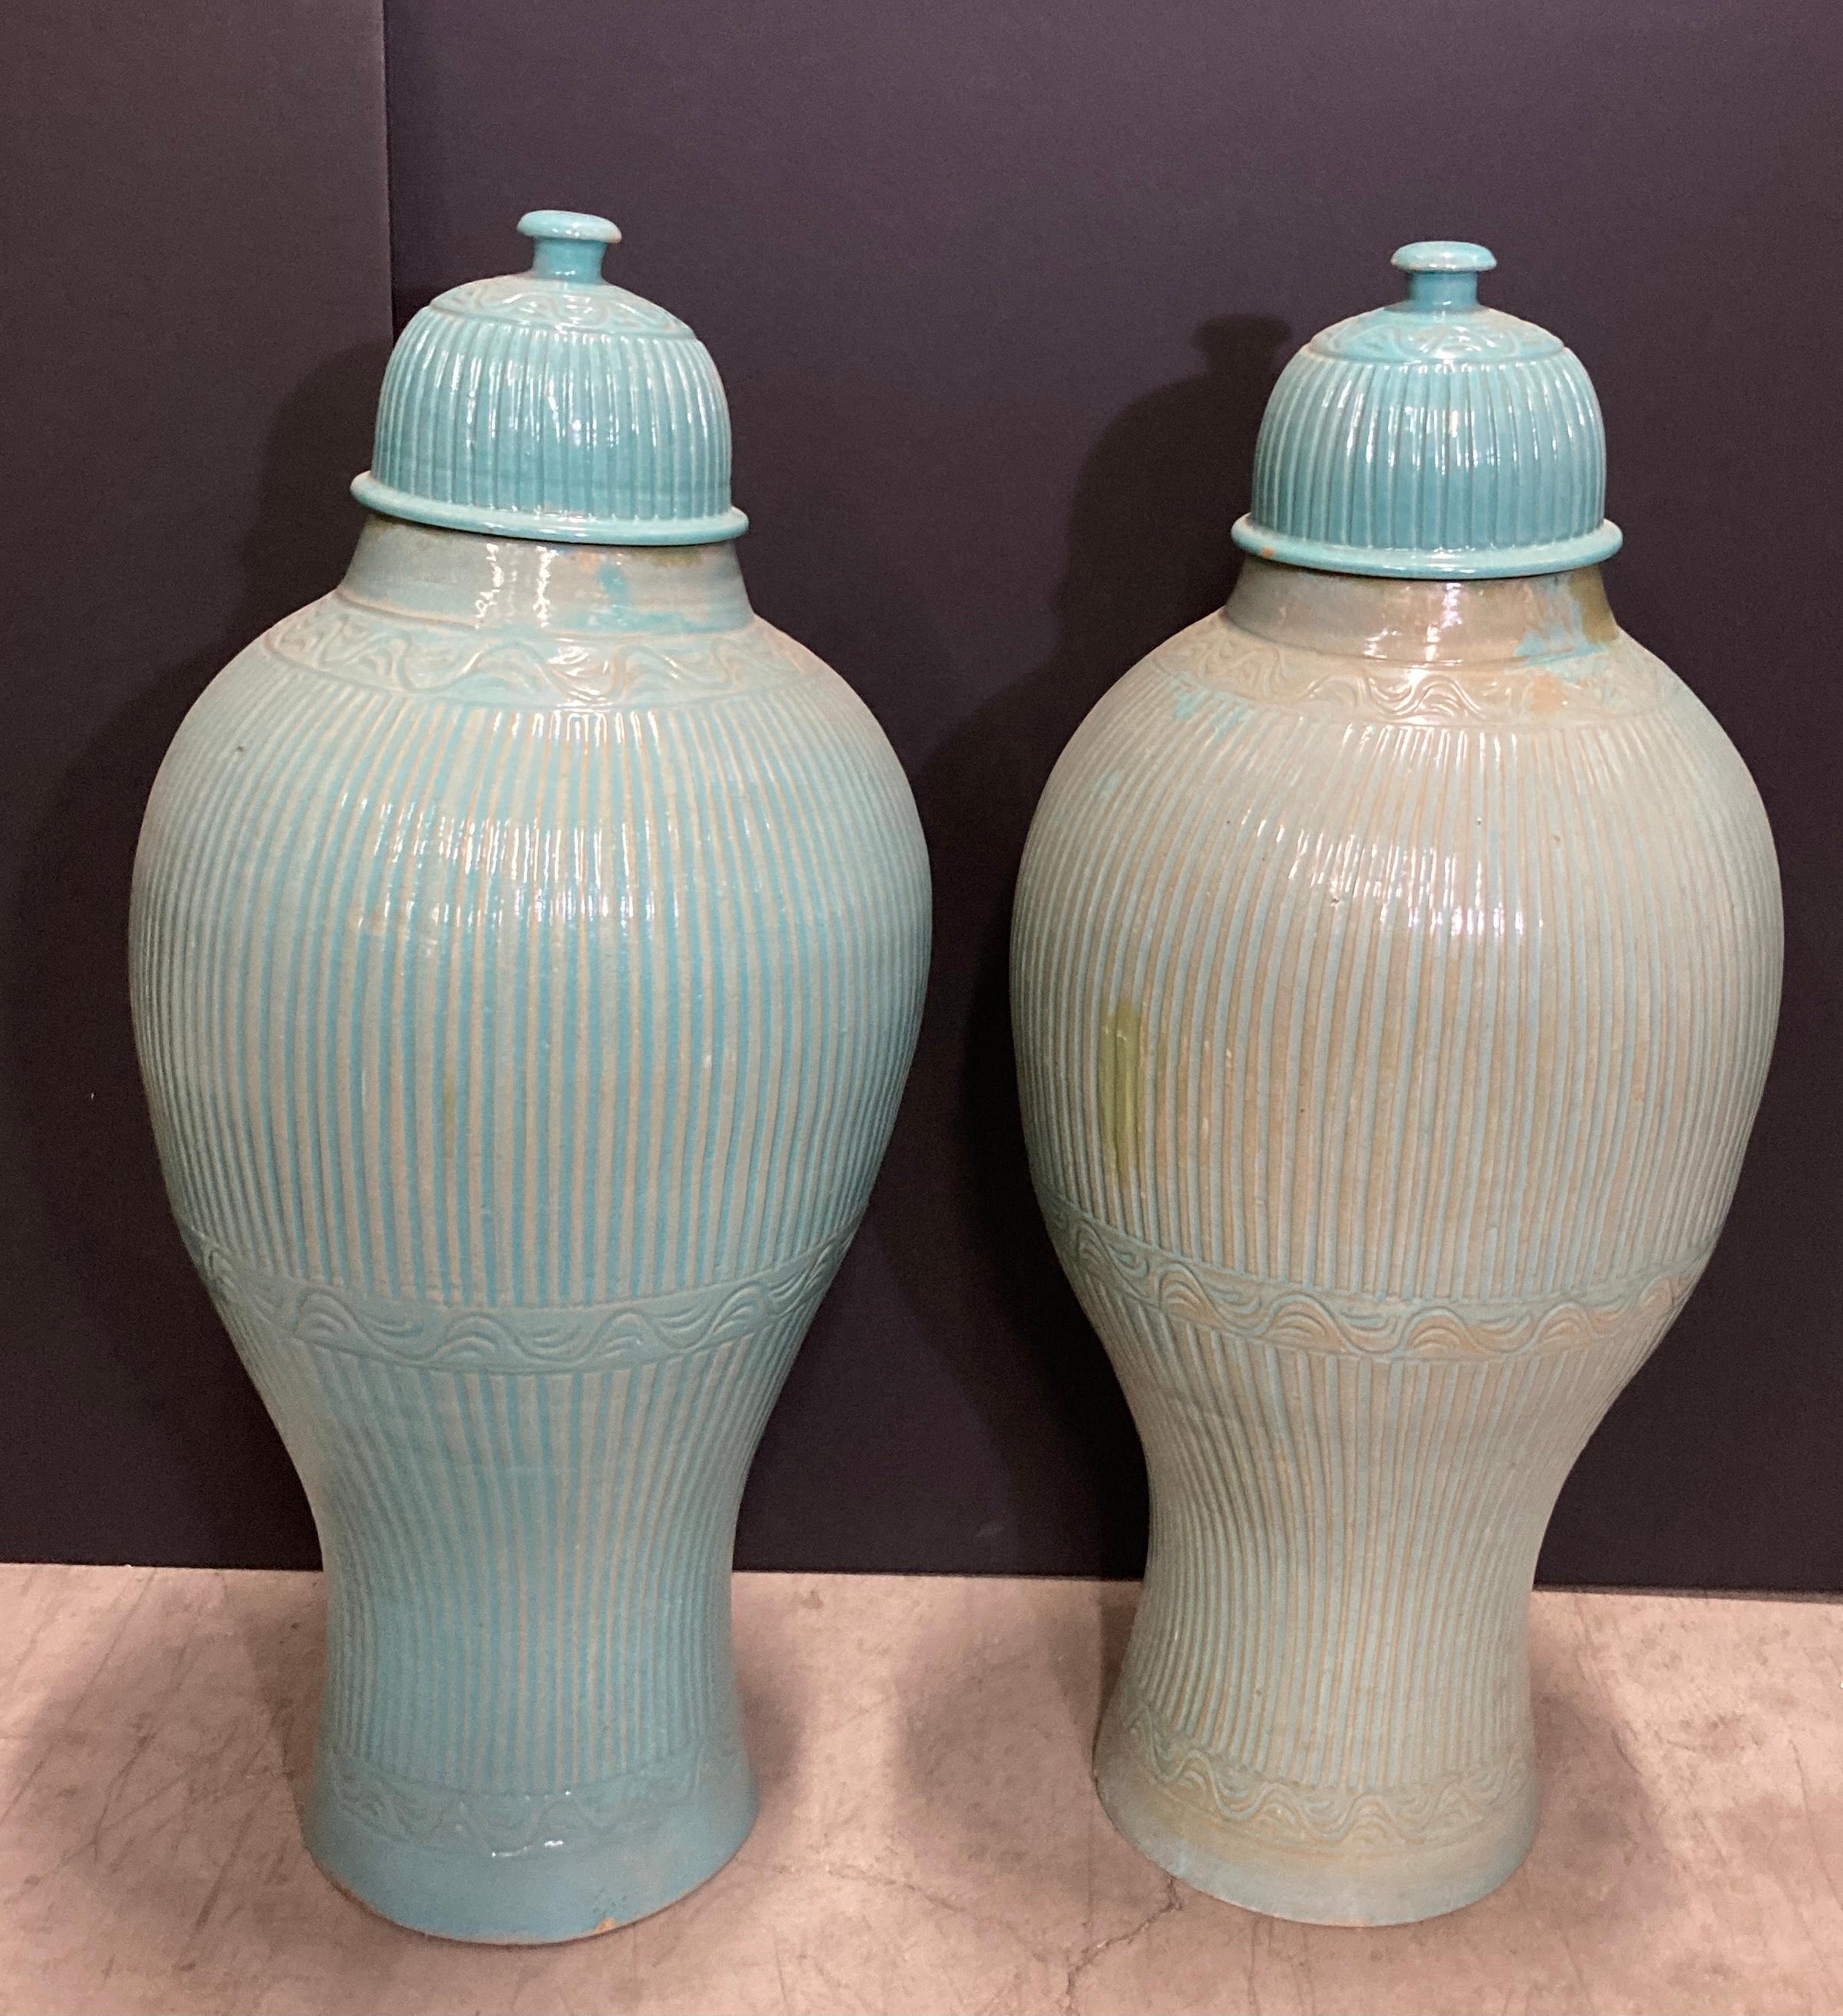 Aqua blue hand-crafted pair of large Moroccan ceramic urns with lid. Measures: large 3'.
Hand-made Moroccan Moorish style turquoise ceramic jars or large vases.

